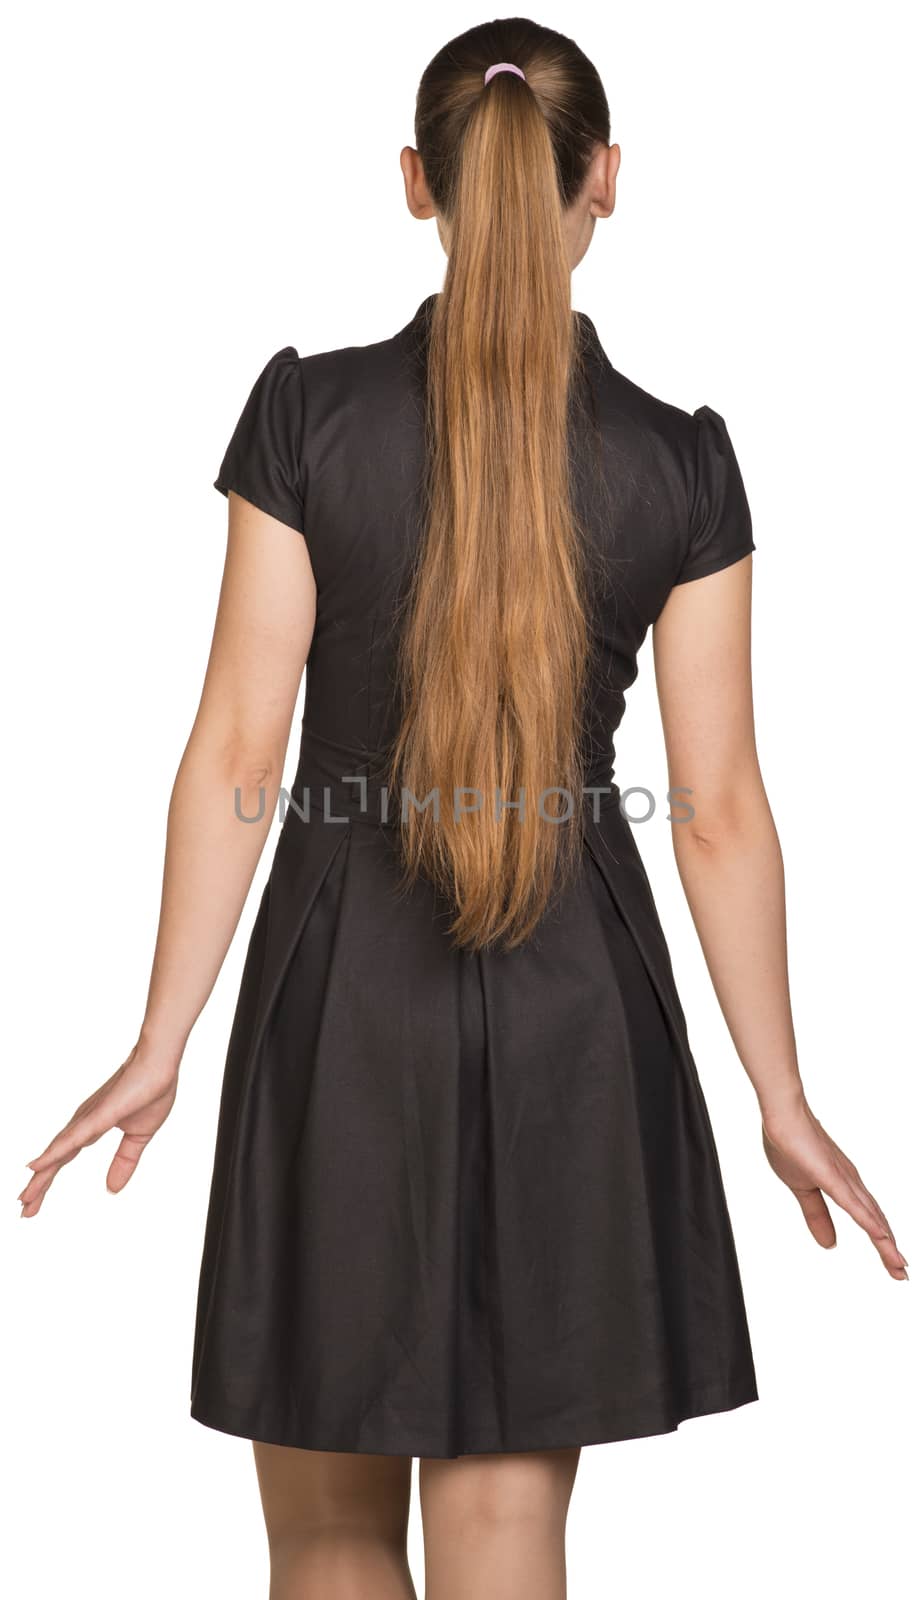 Attractive young woman in black dress. Rear view. Isolated on white